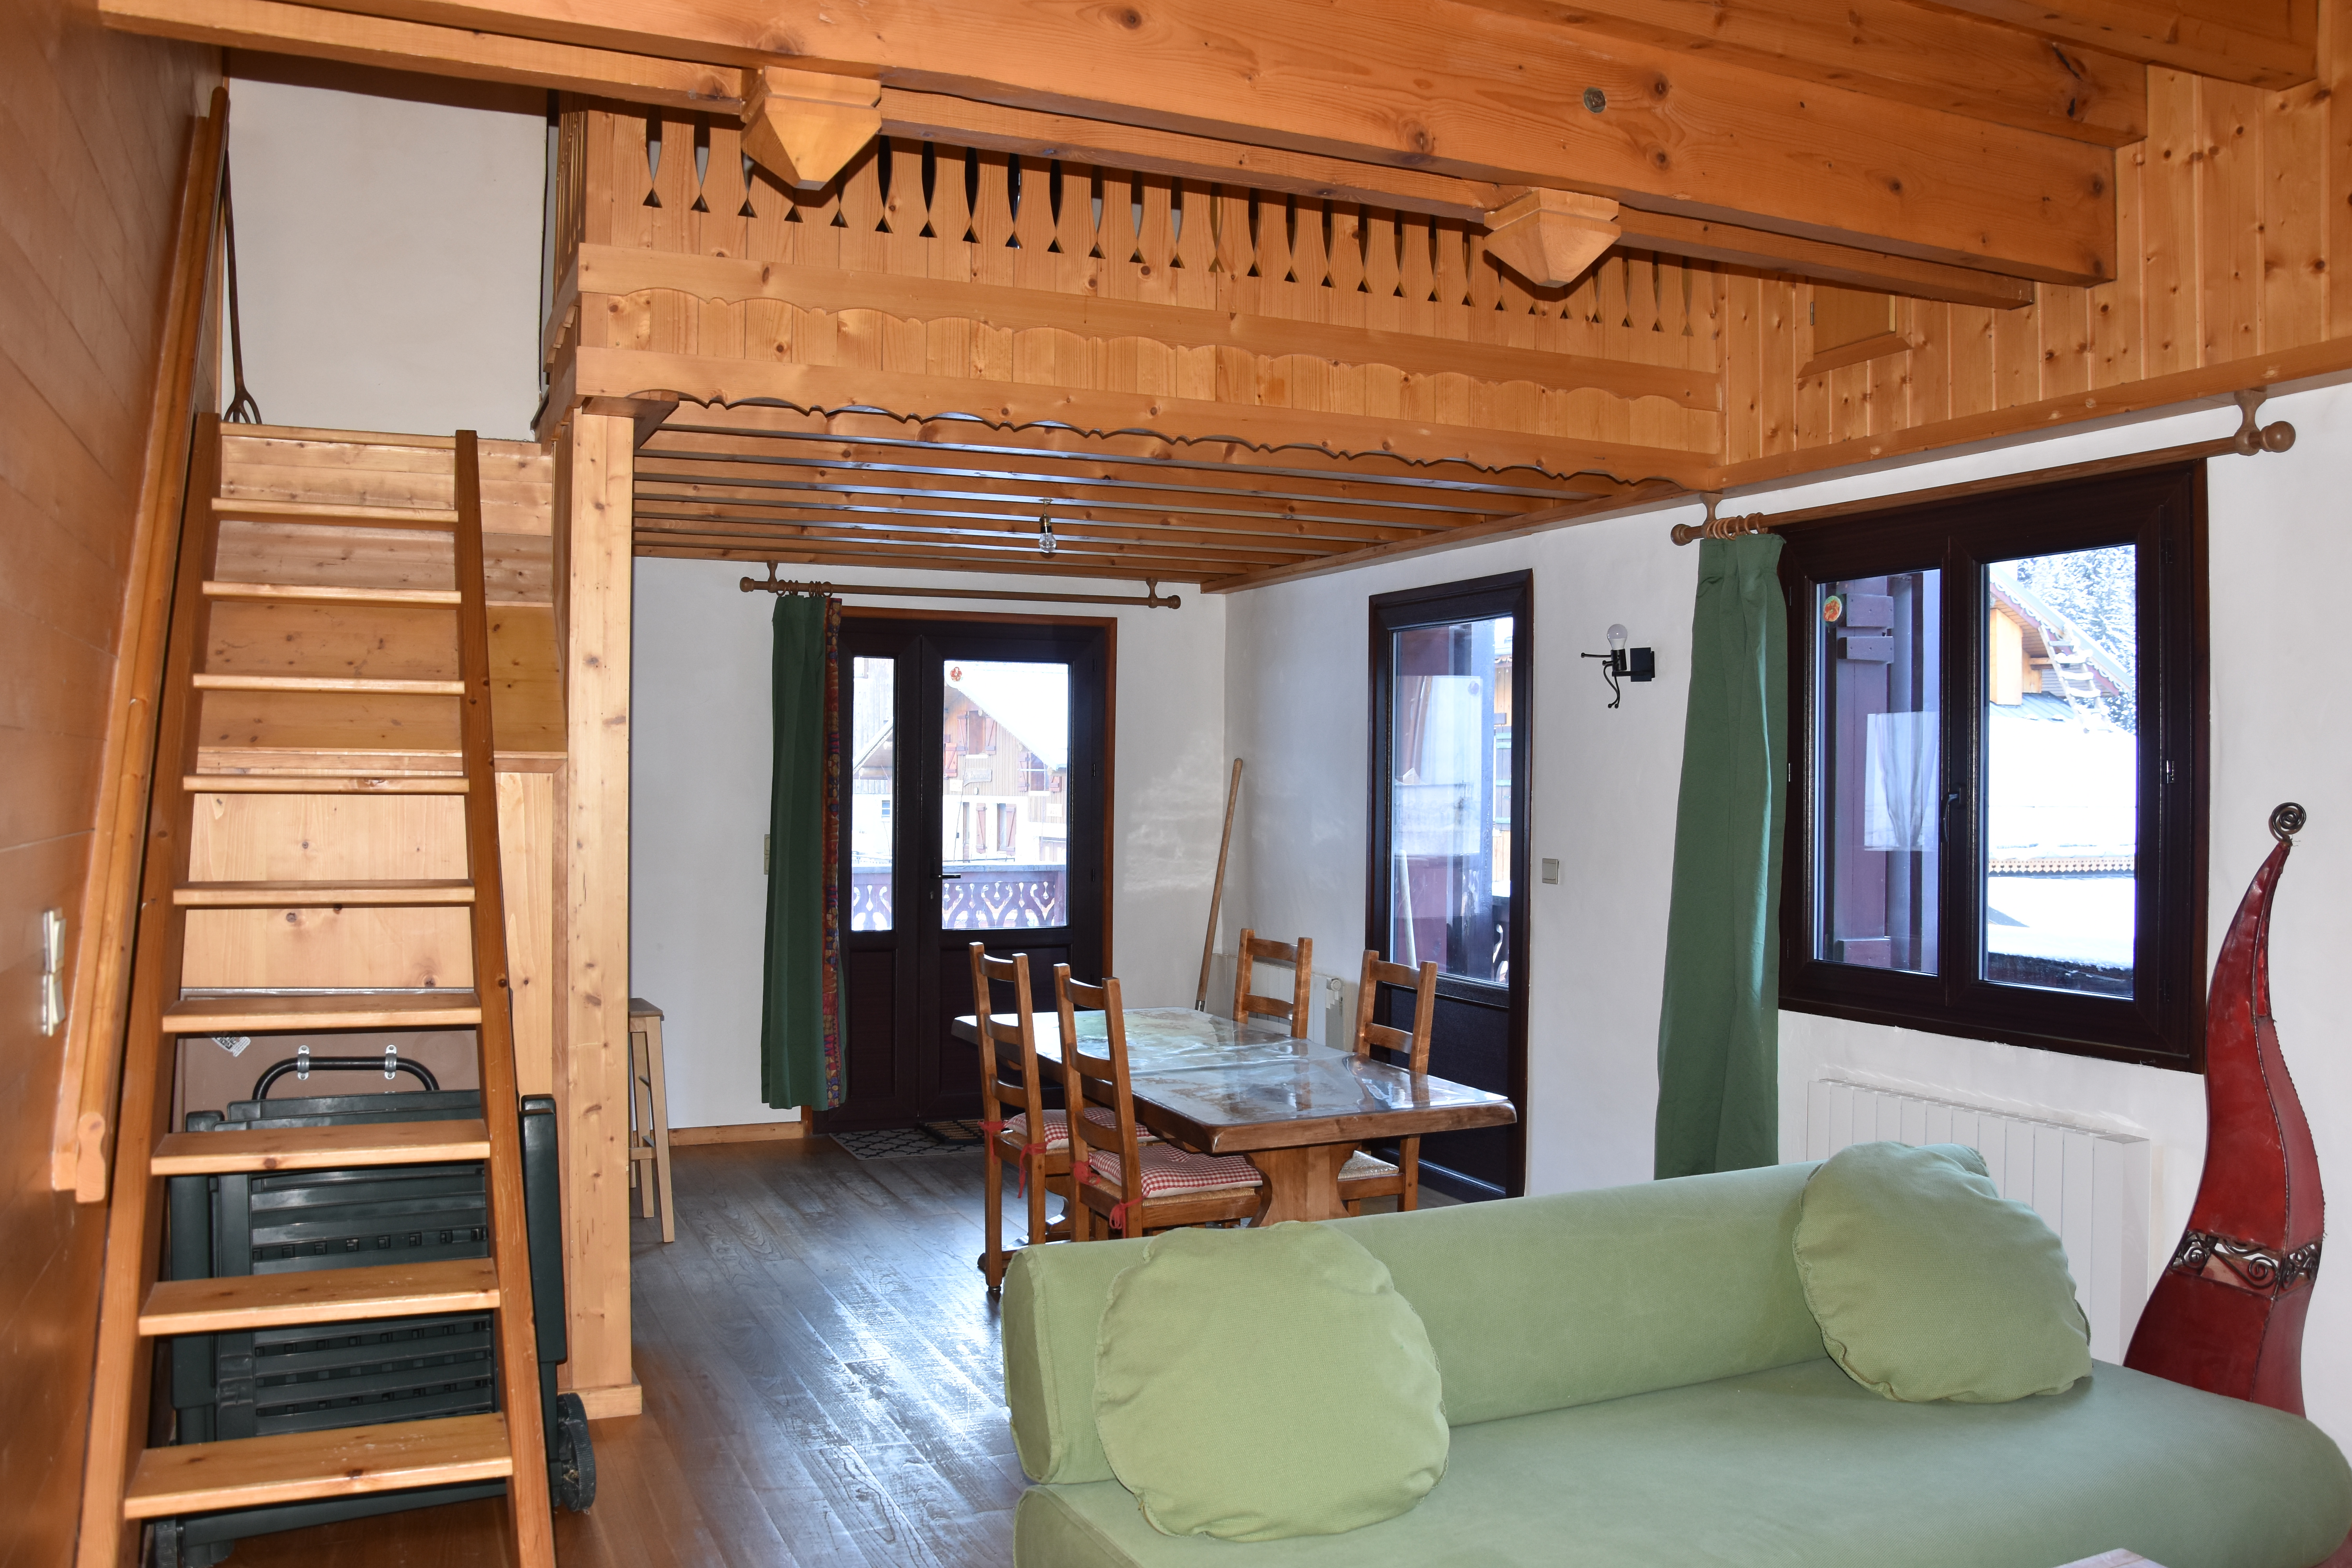 Sale : Chalet with 4 apartments